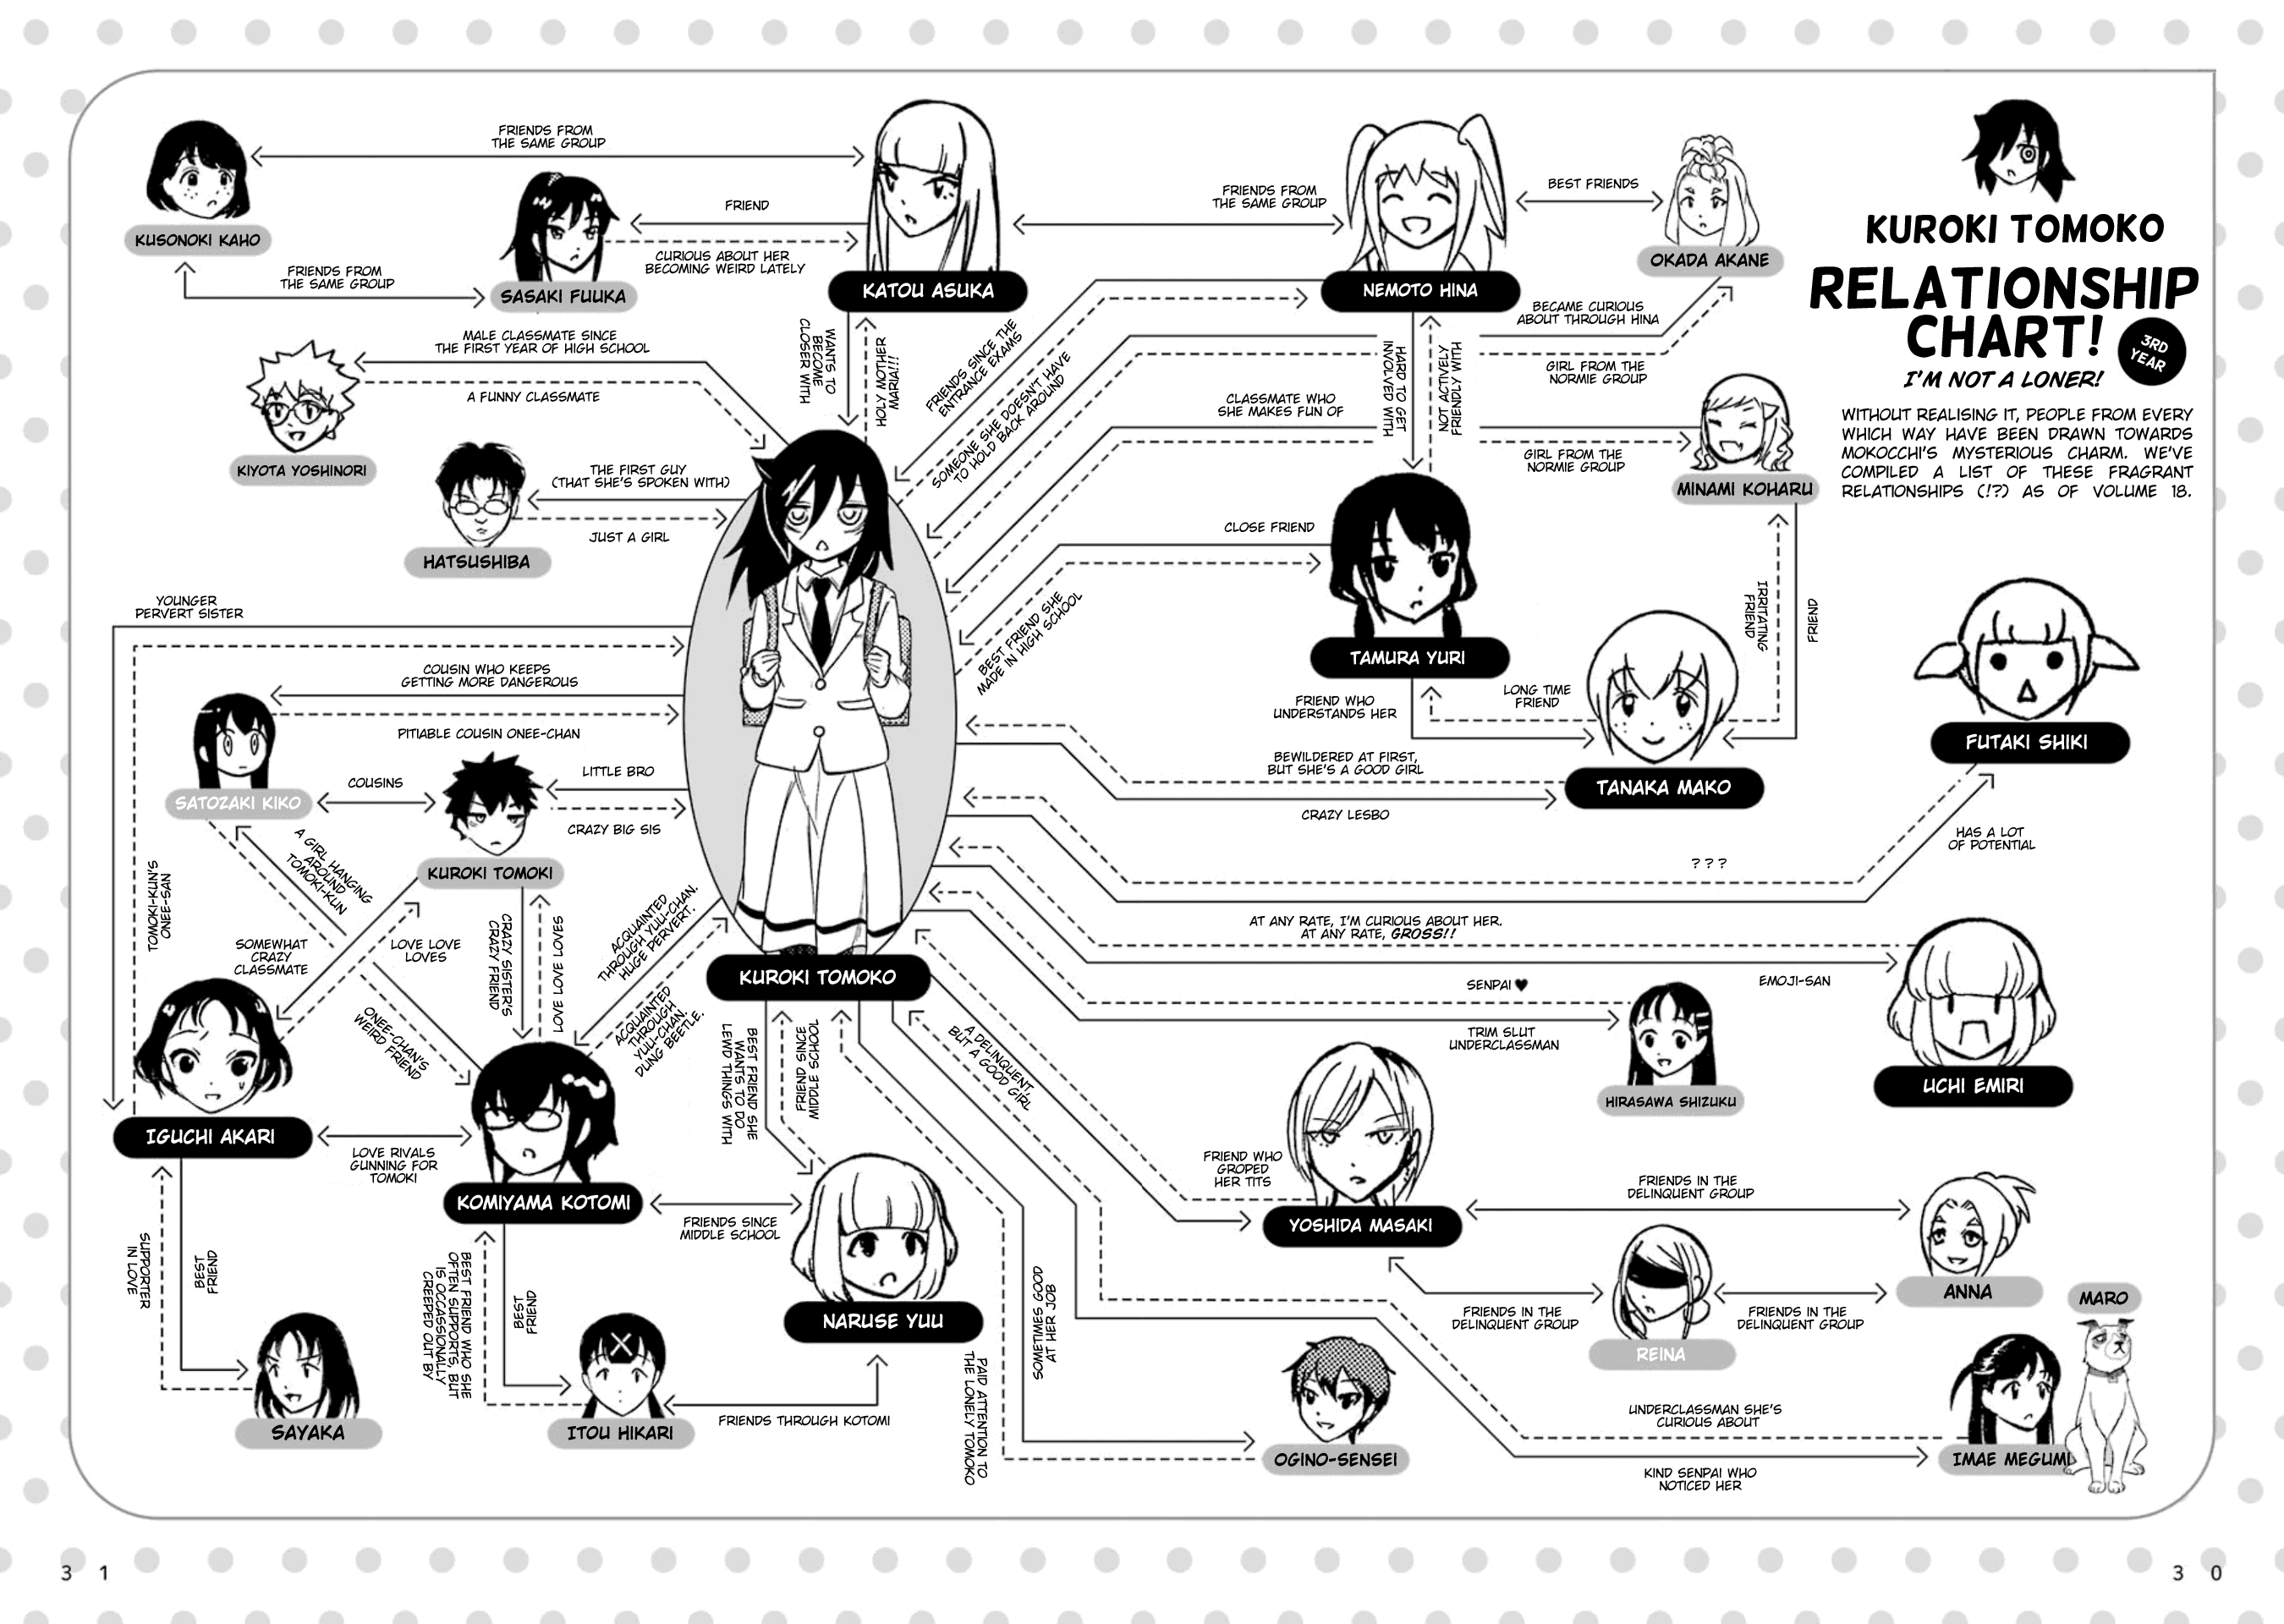 It's Not My Fault That I'm Not Popular! Vol.18 Chapter 176.6: Volume 18 Special Edition Booklet: Character Introductions - Picture 2